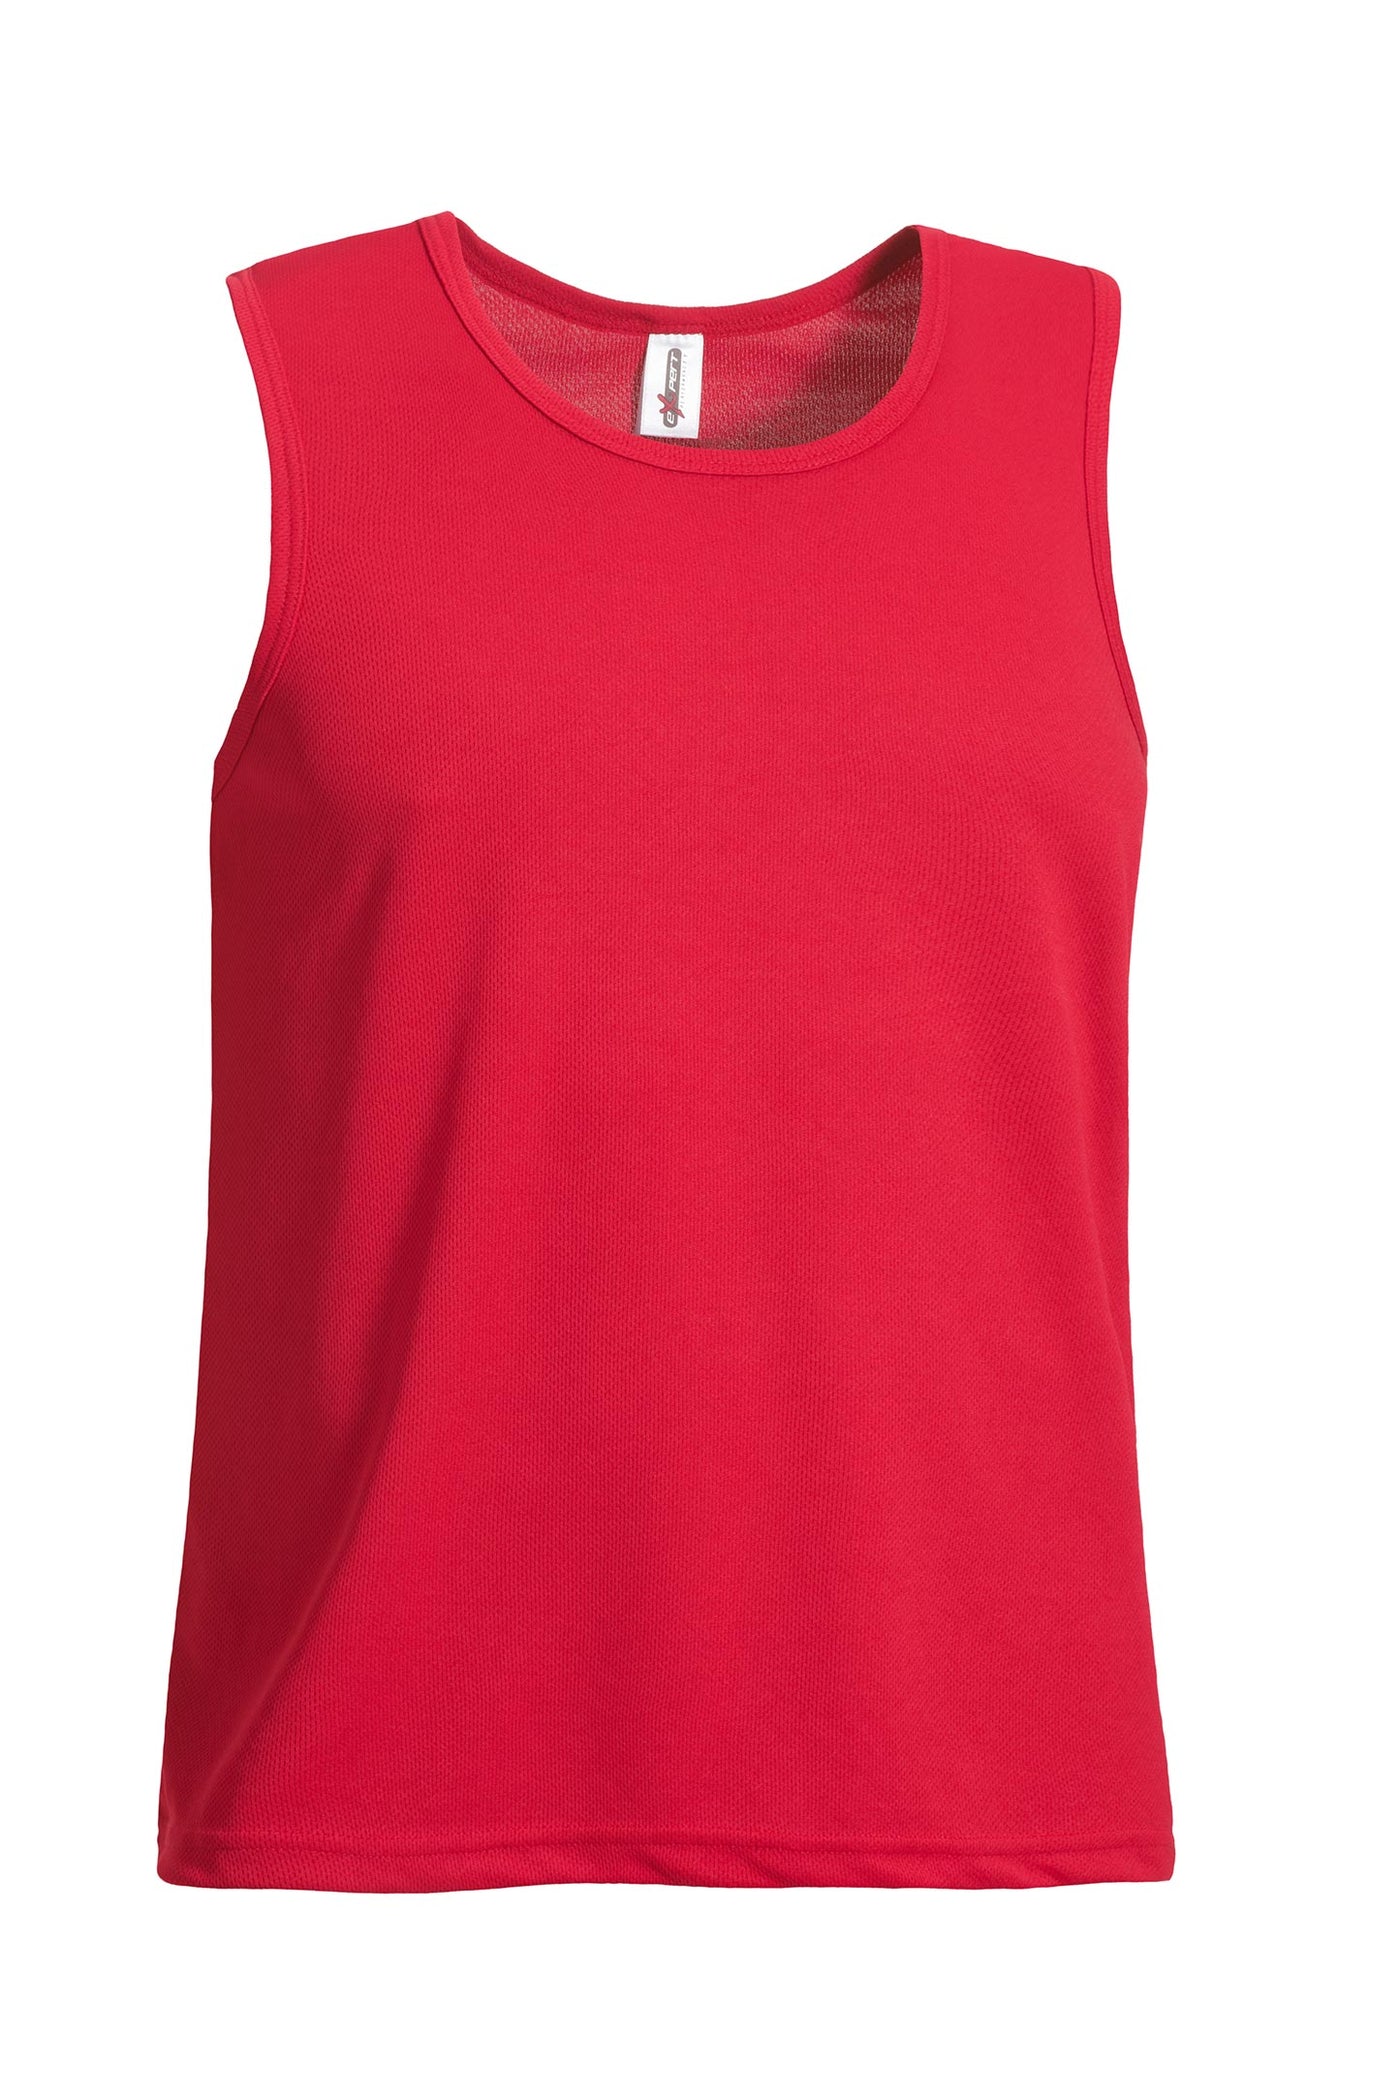 Oxymesh™ Muscle Tank 🇺🇸 - Expert Brand Apparel#color_true-red